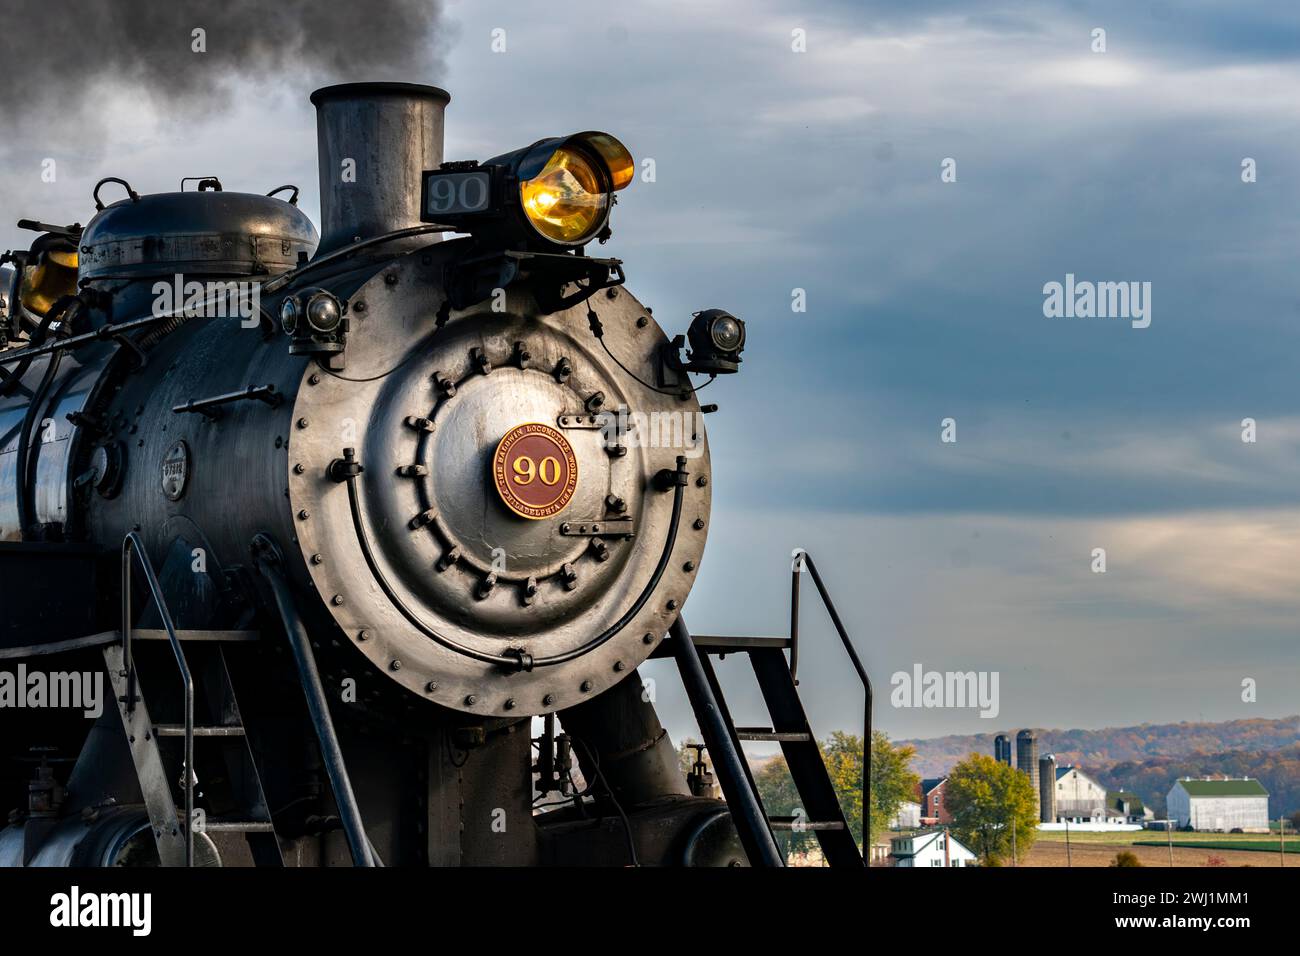 Close Up View of the Front of an Antique Steam Locomotive Blowing Smoke Stock Photo